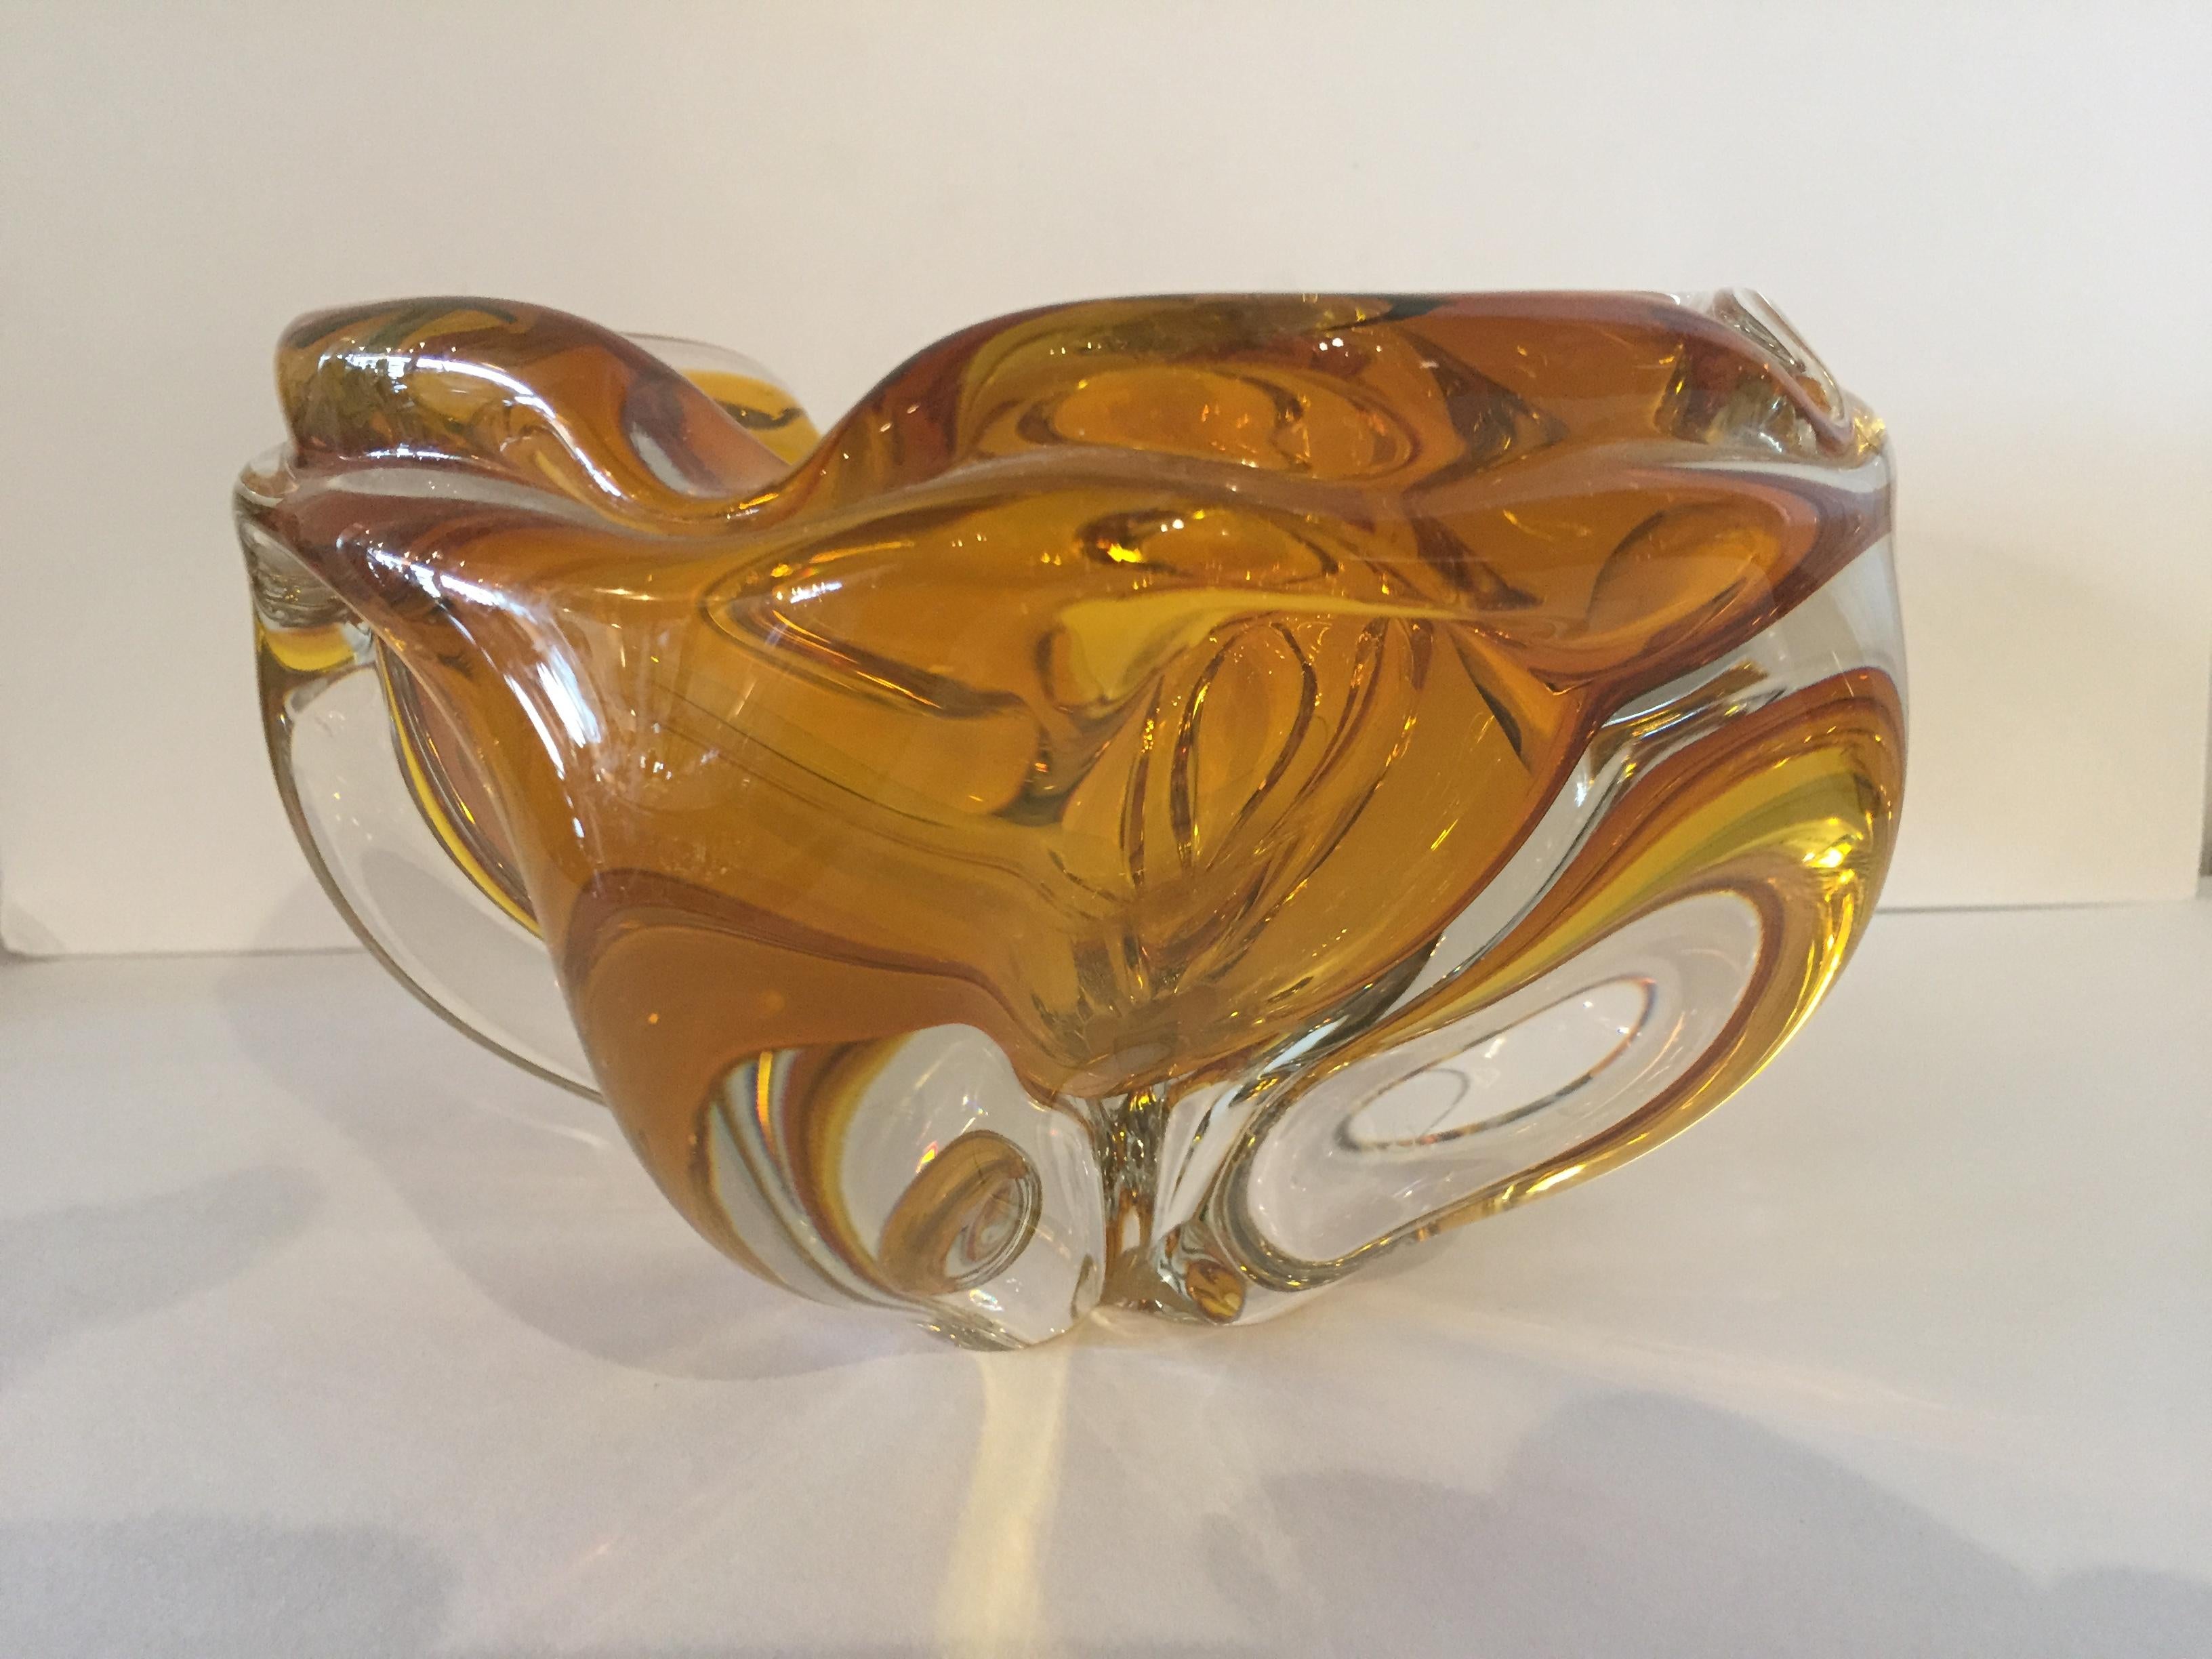 Murano Italian vintage extra large vintage citrine and clear to amber colored ash tray, with original Christie’s label and date auctioned, 1983 .This is in a bowl shape with several ribs for cigars or cigarettes ,but could also float a large flower